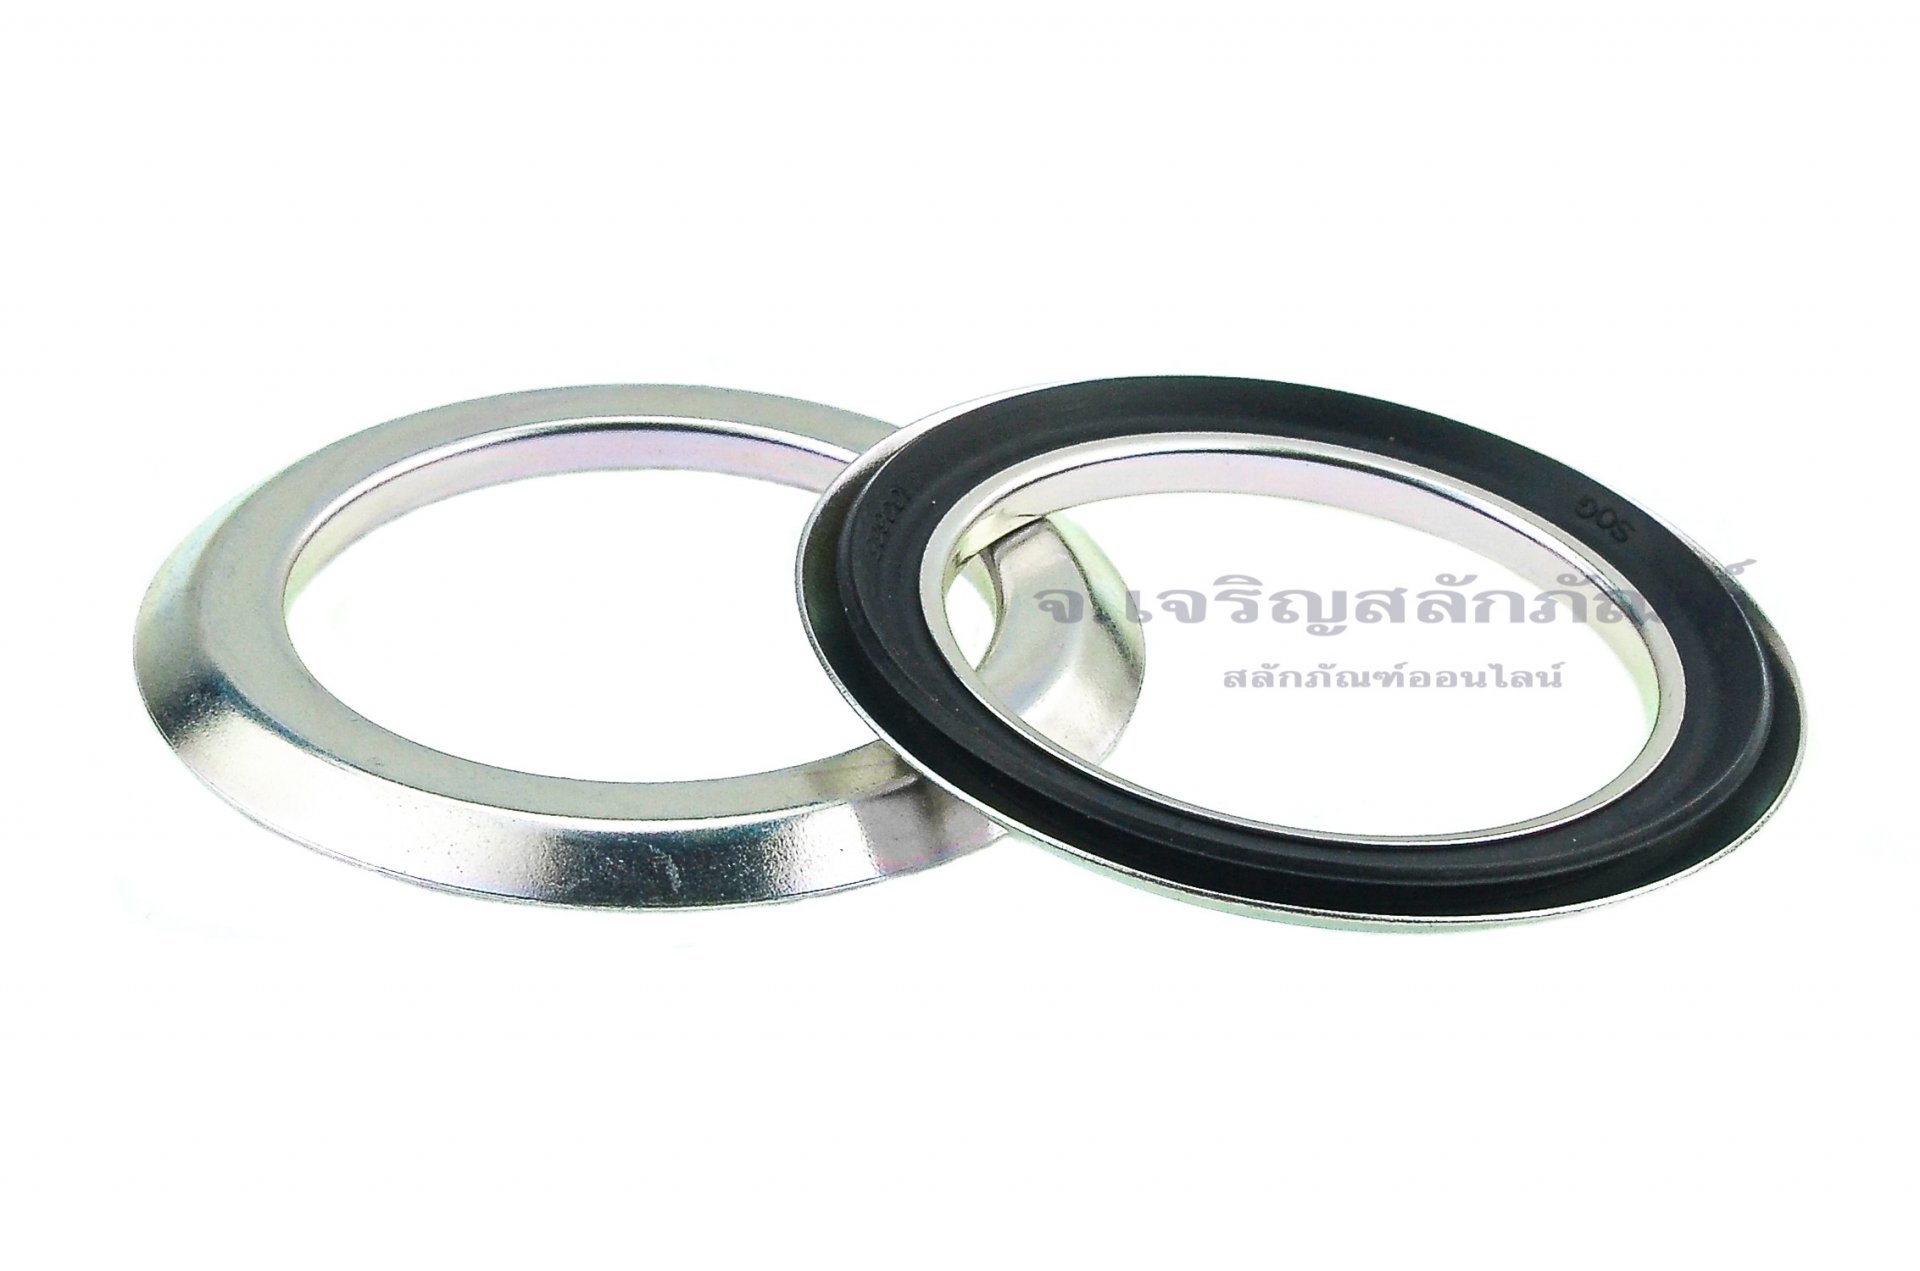 Demaisi 9rb Gamma Dust Seal Ring 65*87*5.5/7.5 Or 65x87x5.5/7.5 Mm  Stainless Steel For Motor - Oil Seals & Other Seals - AliExpress